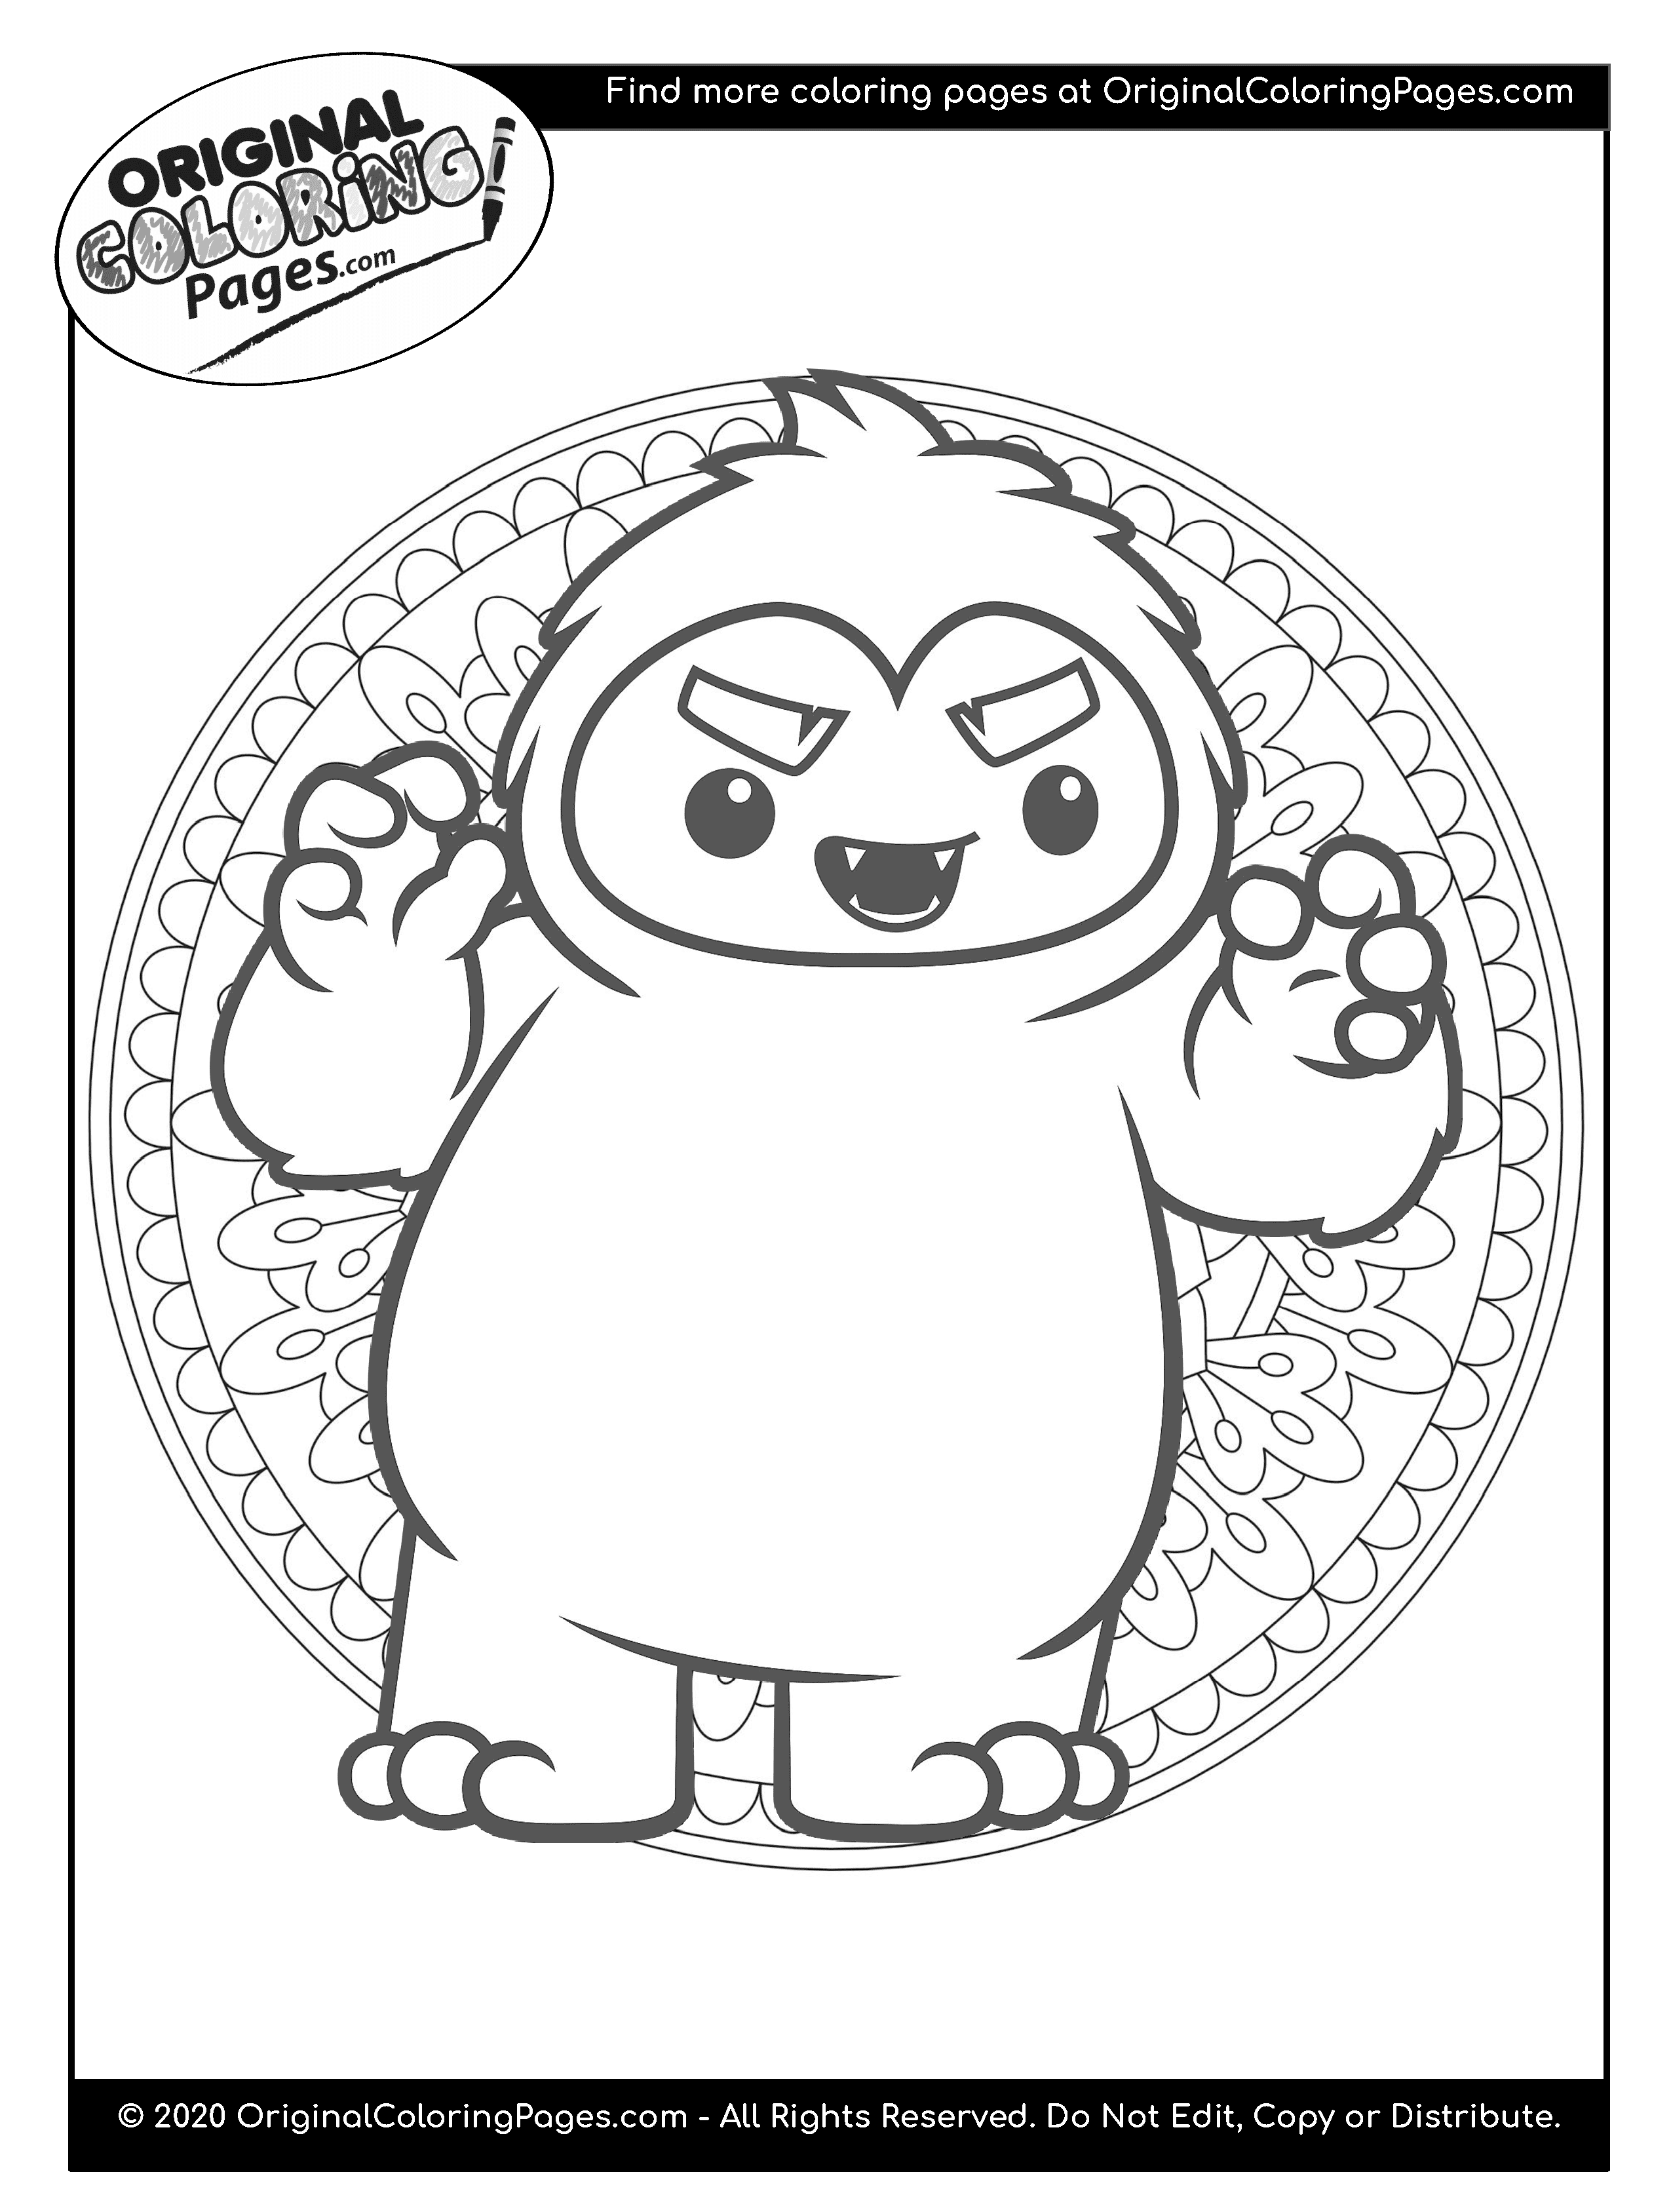 Snow Yeti Coloring Pages | Coloring Pages - Original Coloring Pages